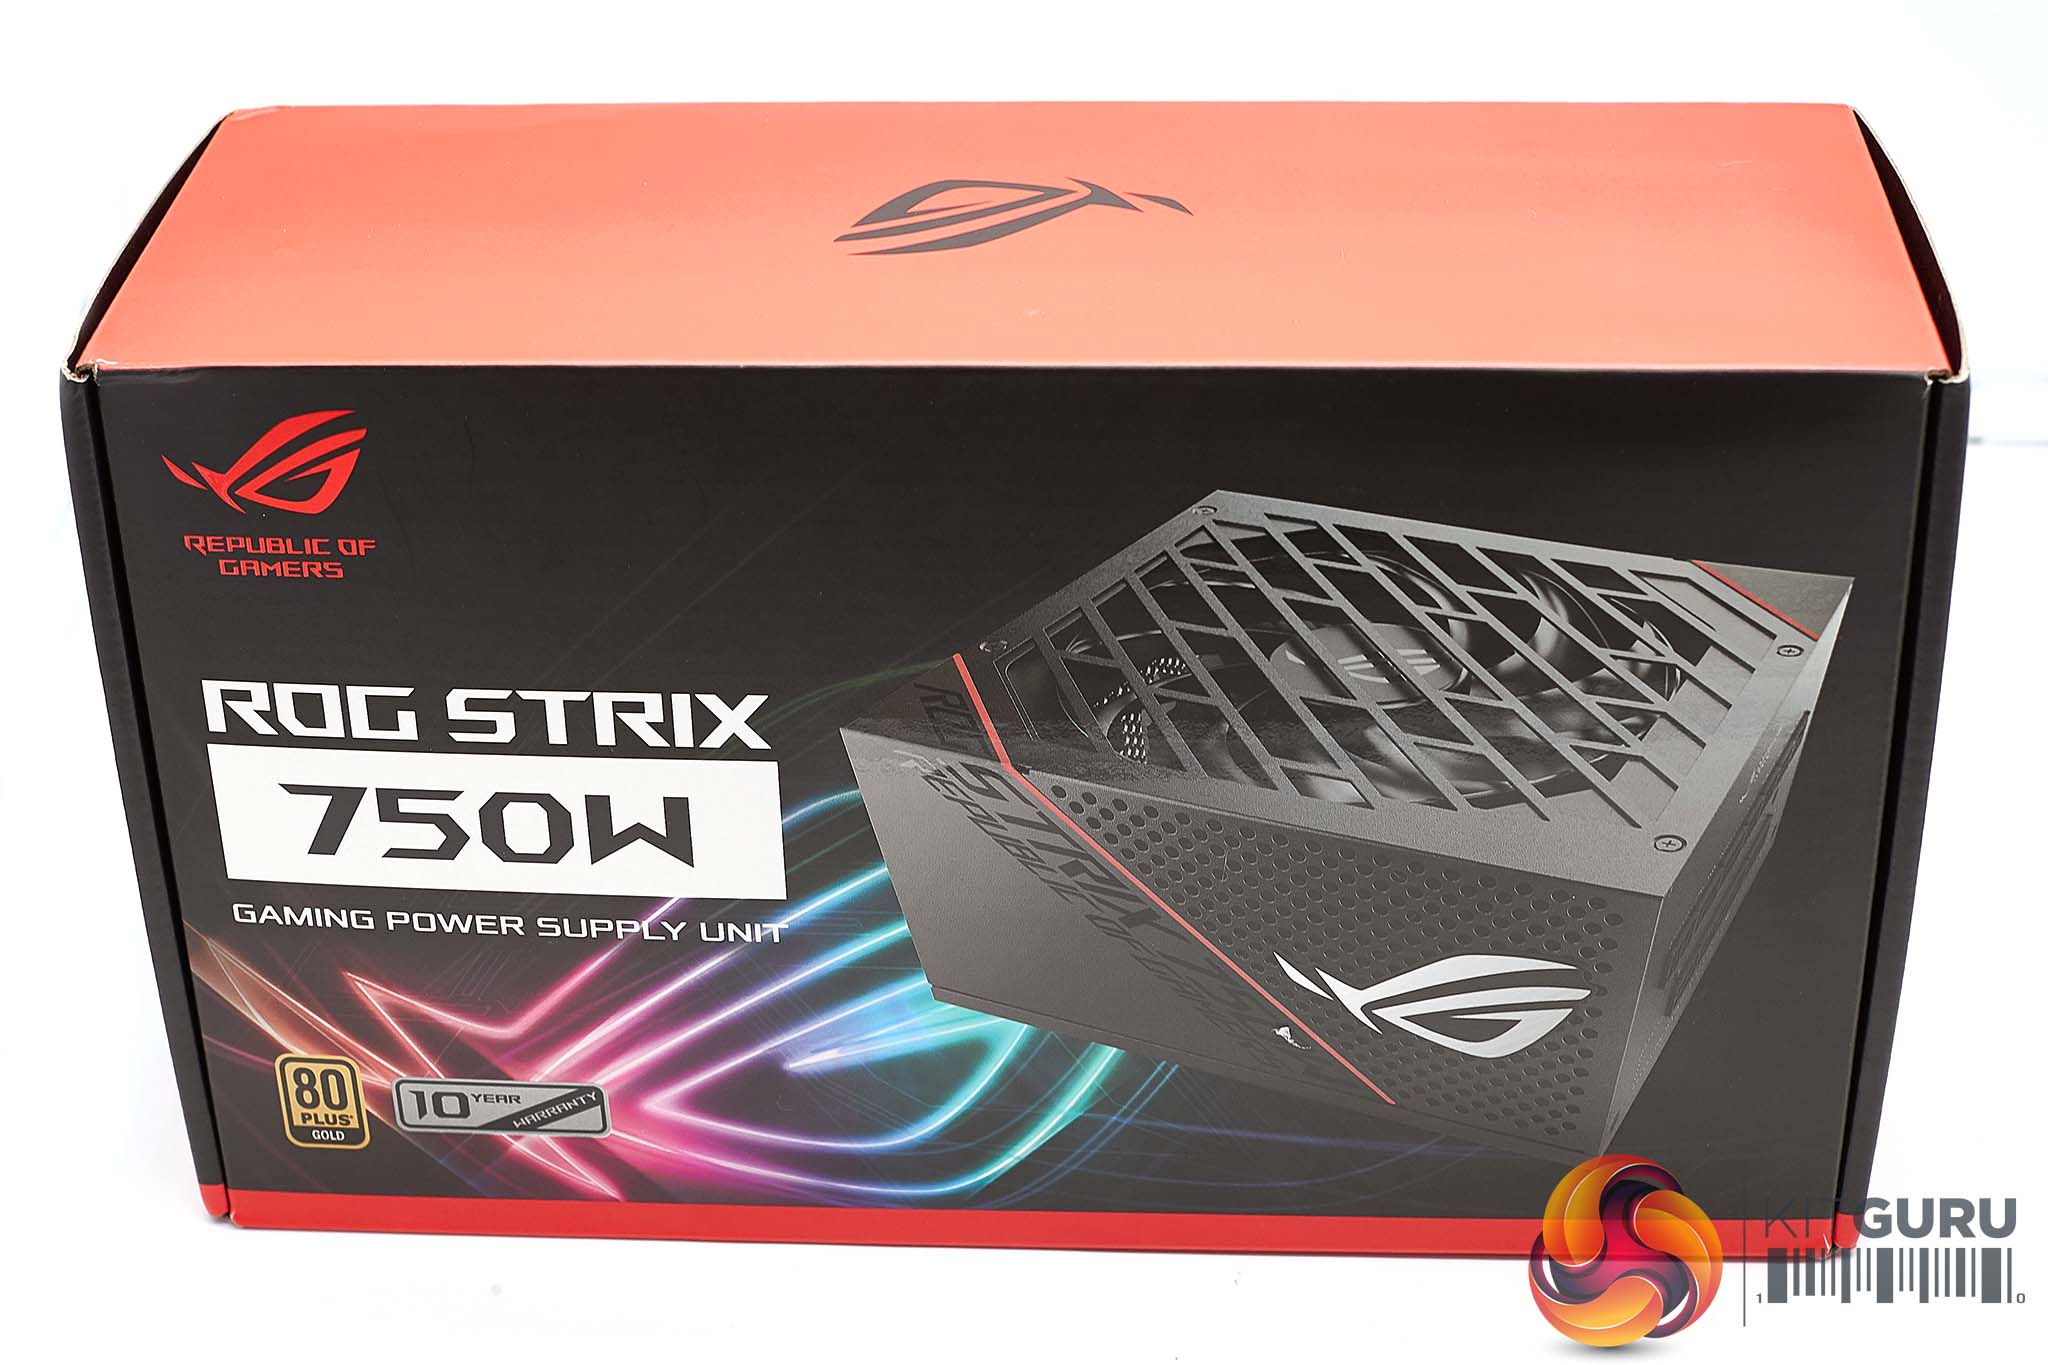 ASUS Power Supply Units, Republic of Gamers